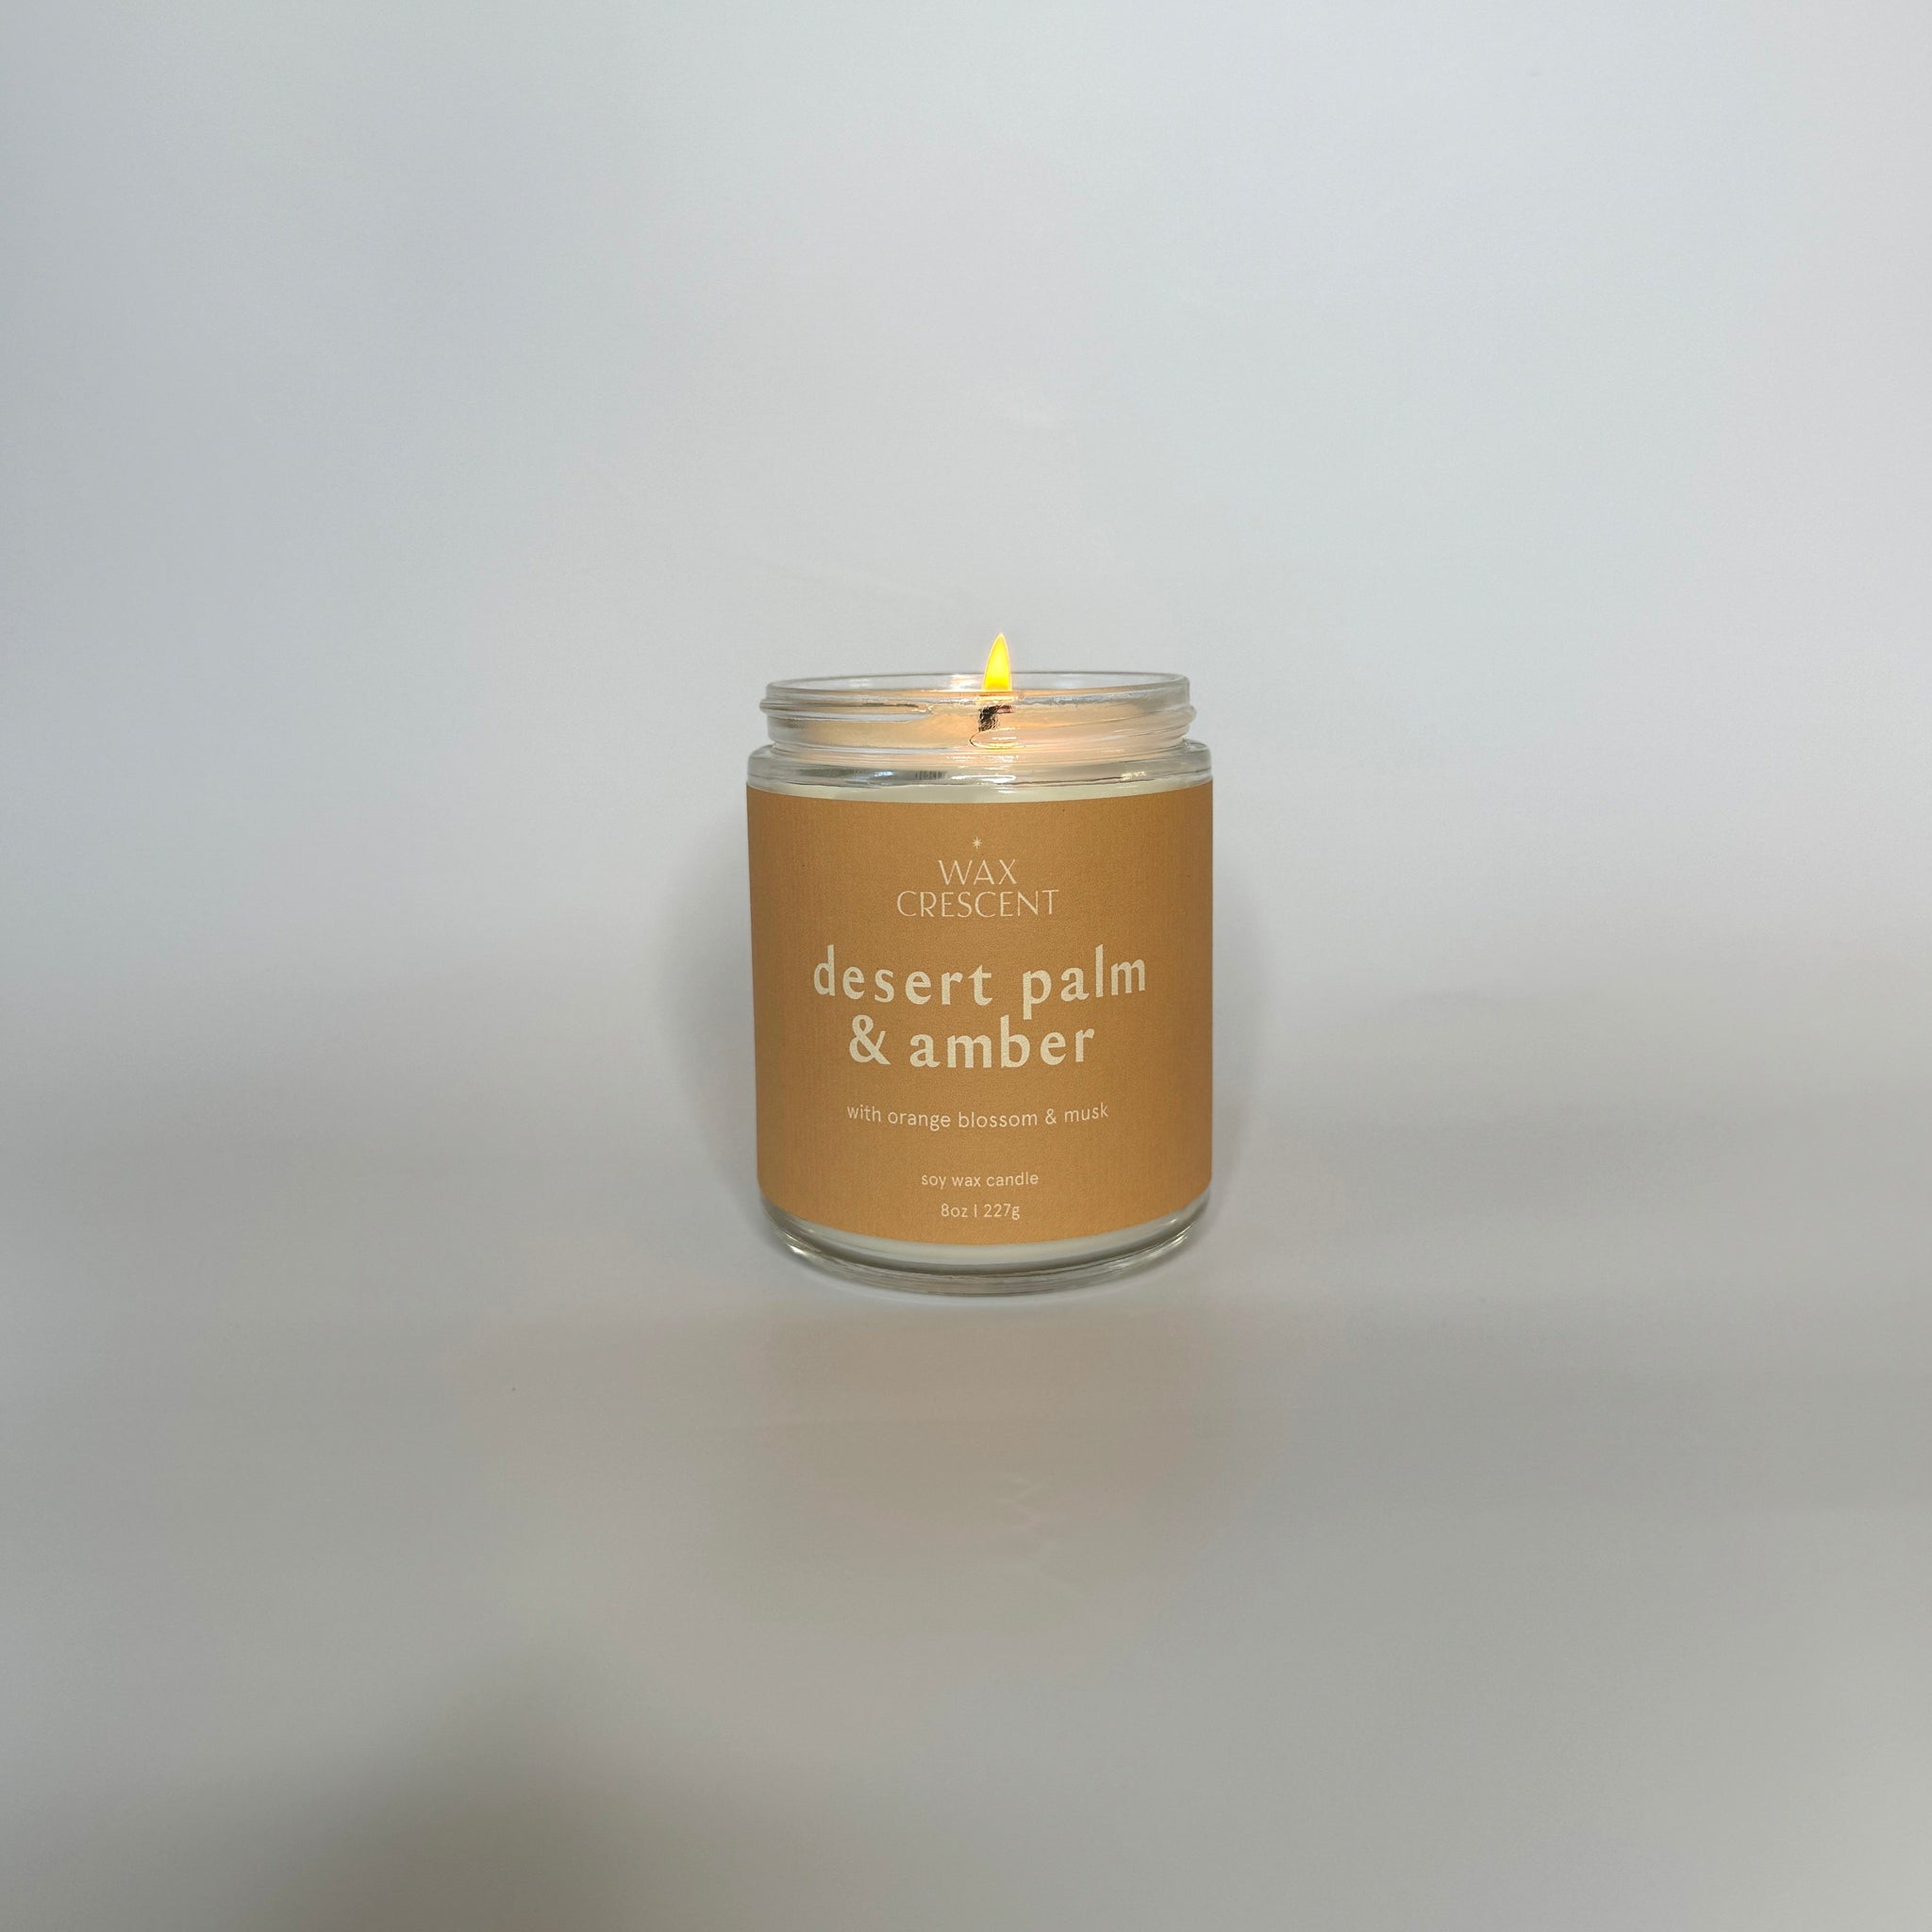 desert palm and amber soy wax candle is hand poured using the finest nontoxic ingredients in Longmont Colorado 